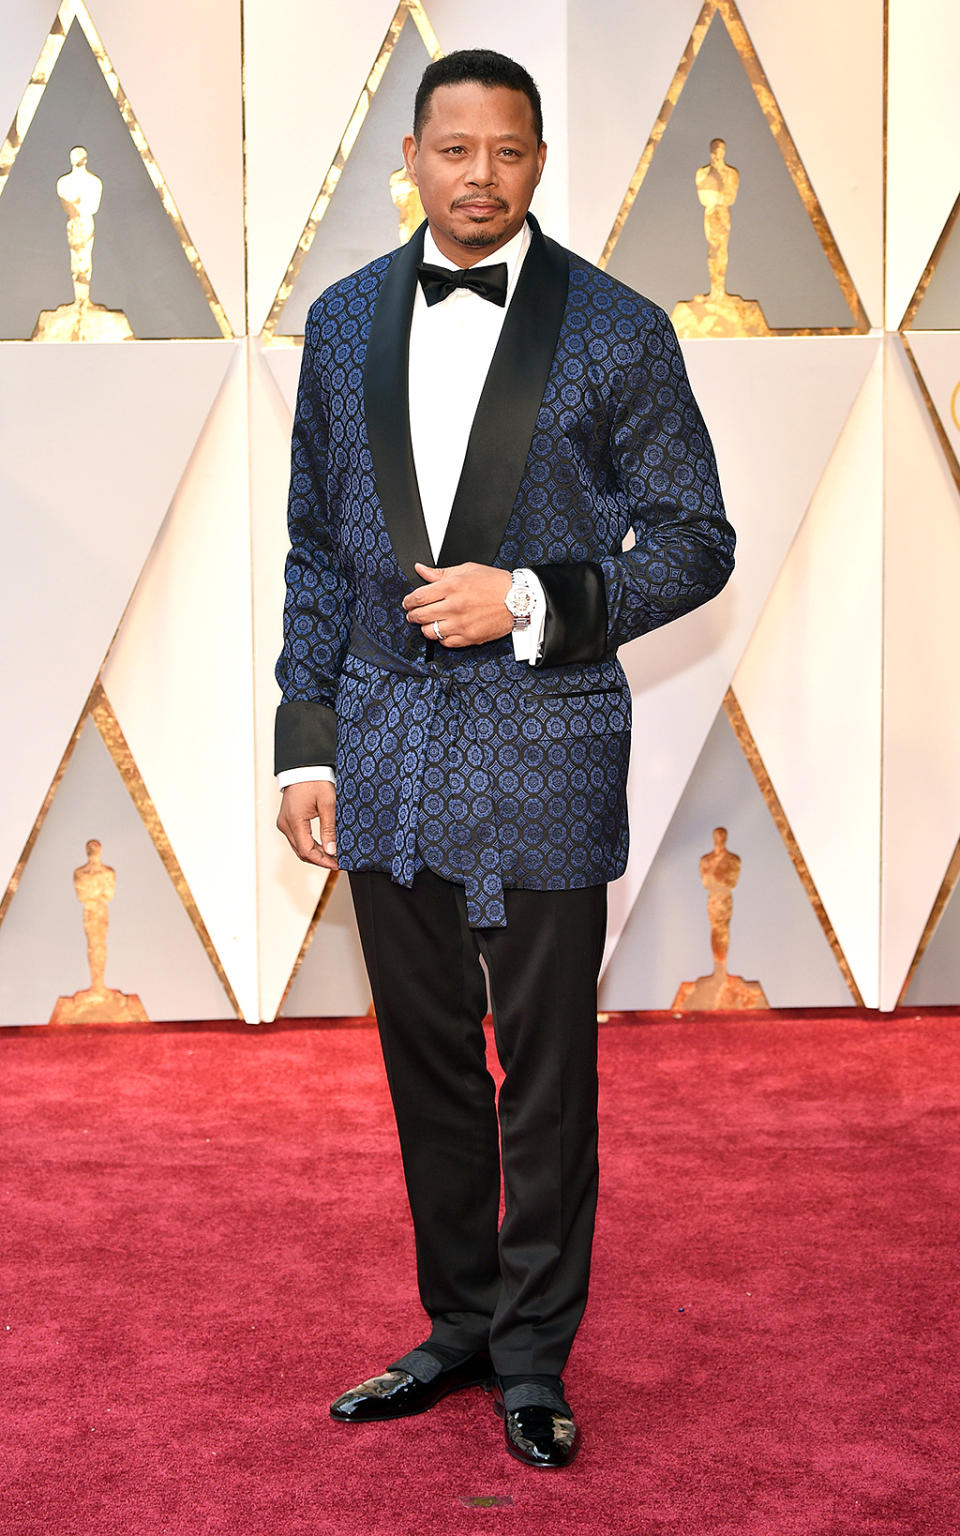 <p>Actor Terrence Howard attends the 89th Annual Academy Awards at Hollywood & Highland Center on February 26, 2017 in Hollywood, California. (Photo by Kevin Mazur/Getty Images) </p>